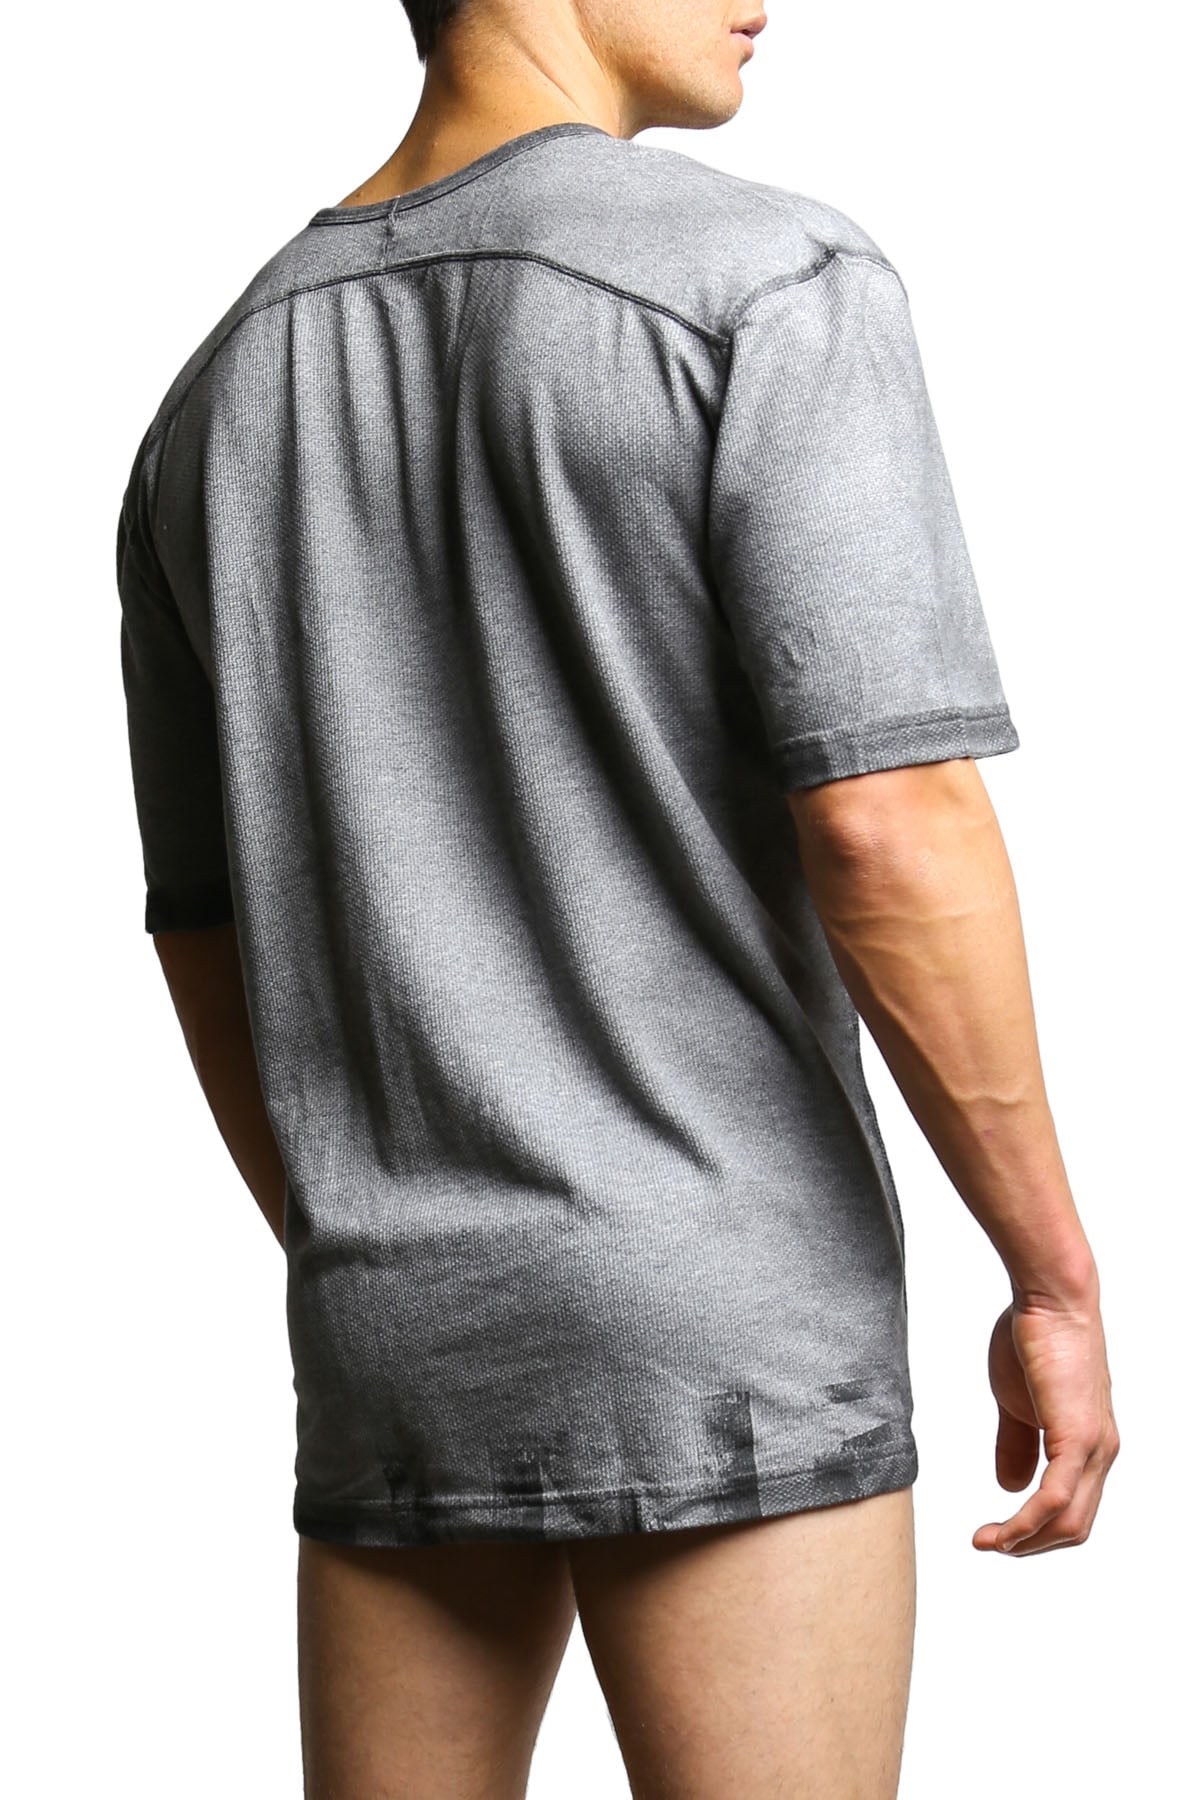 C-IN2 Charcoal Heather Filthy V-Neck Tee